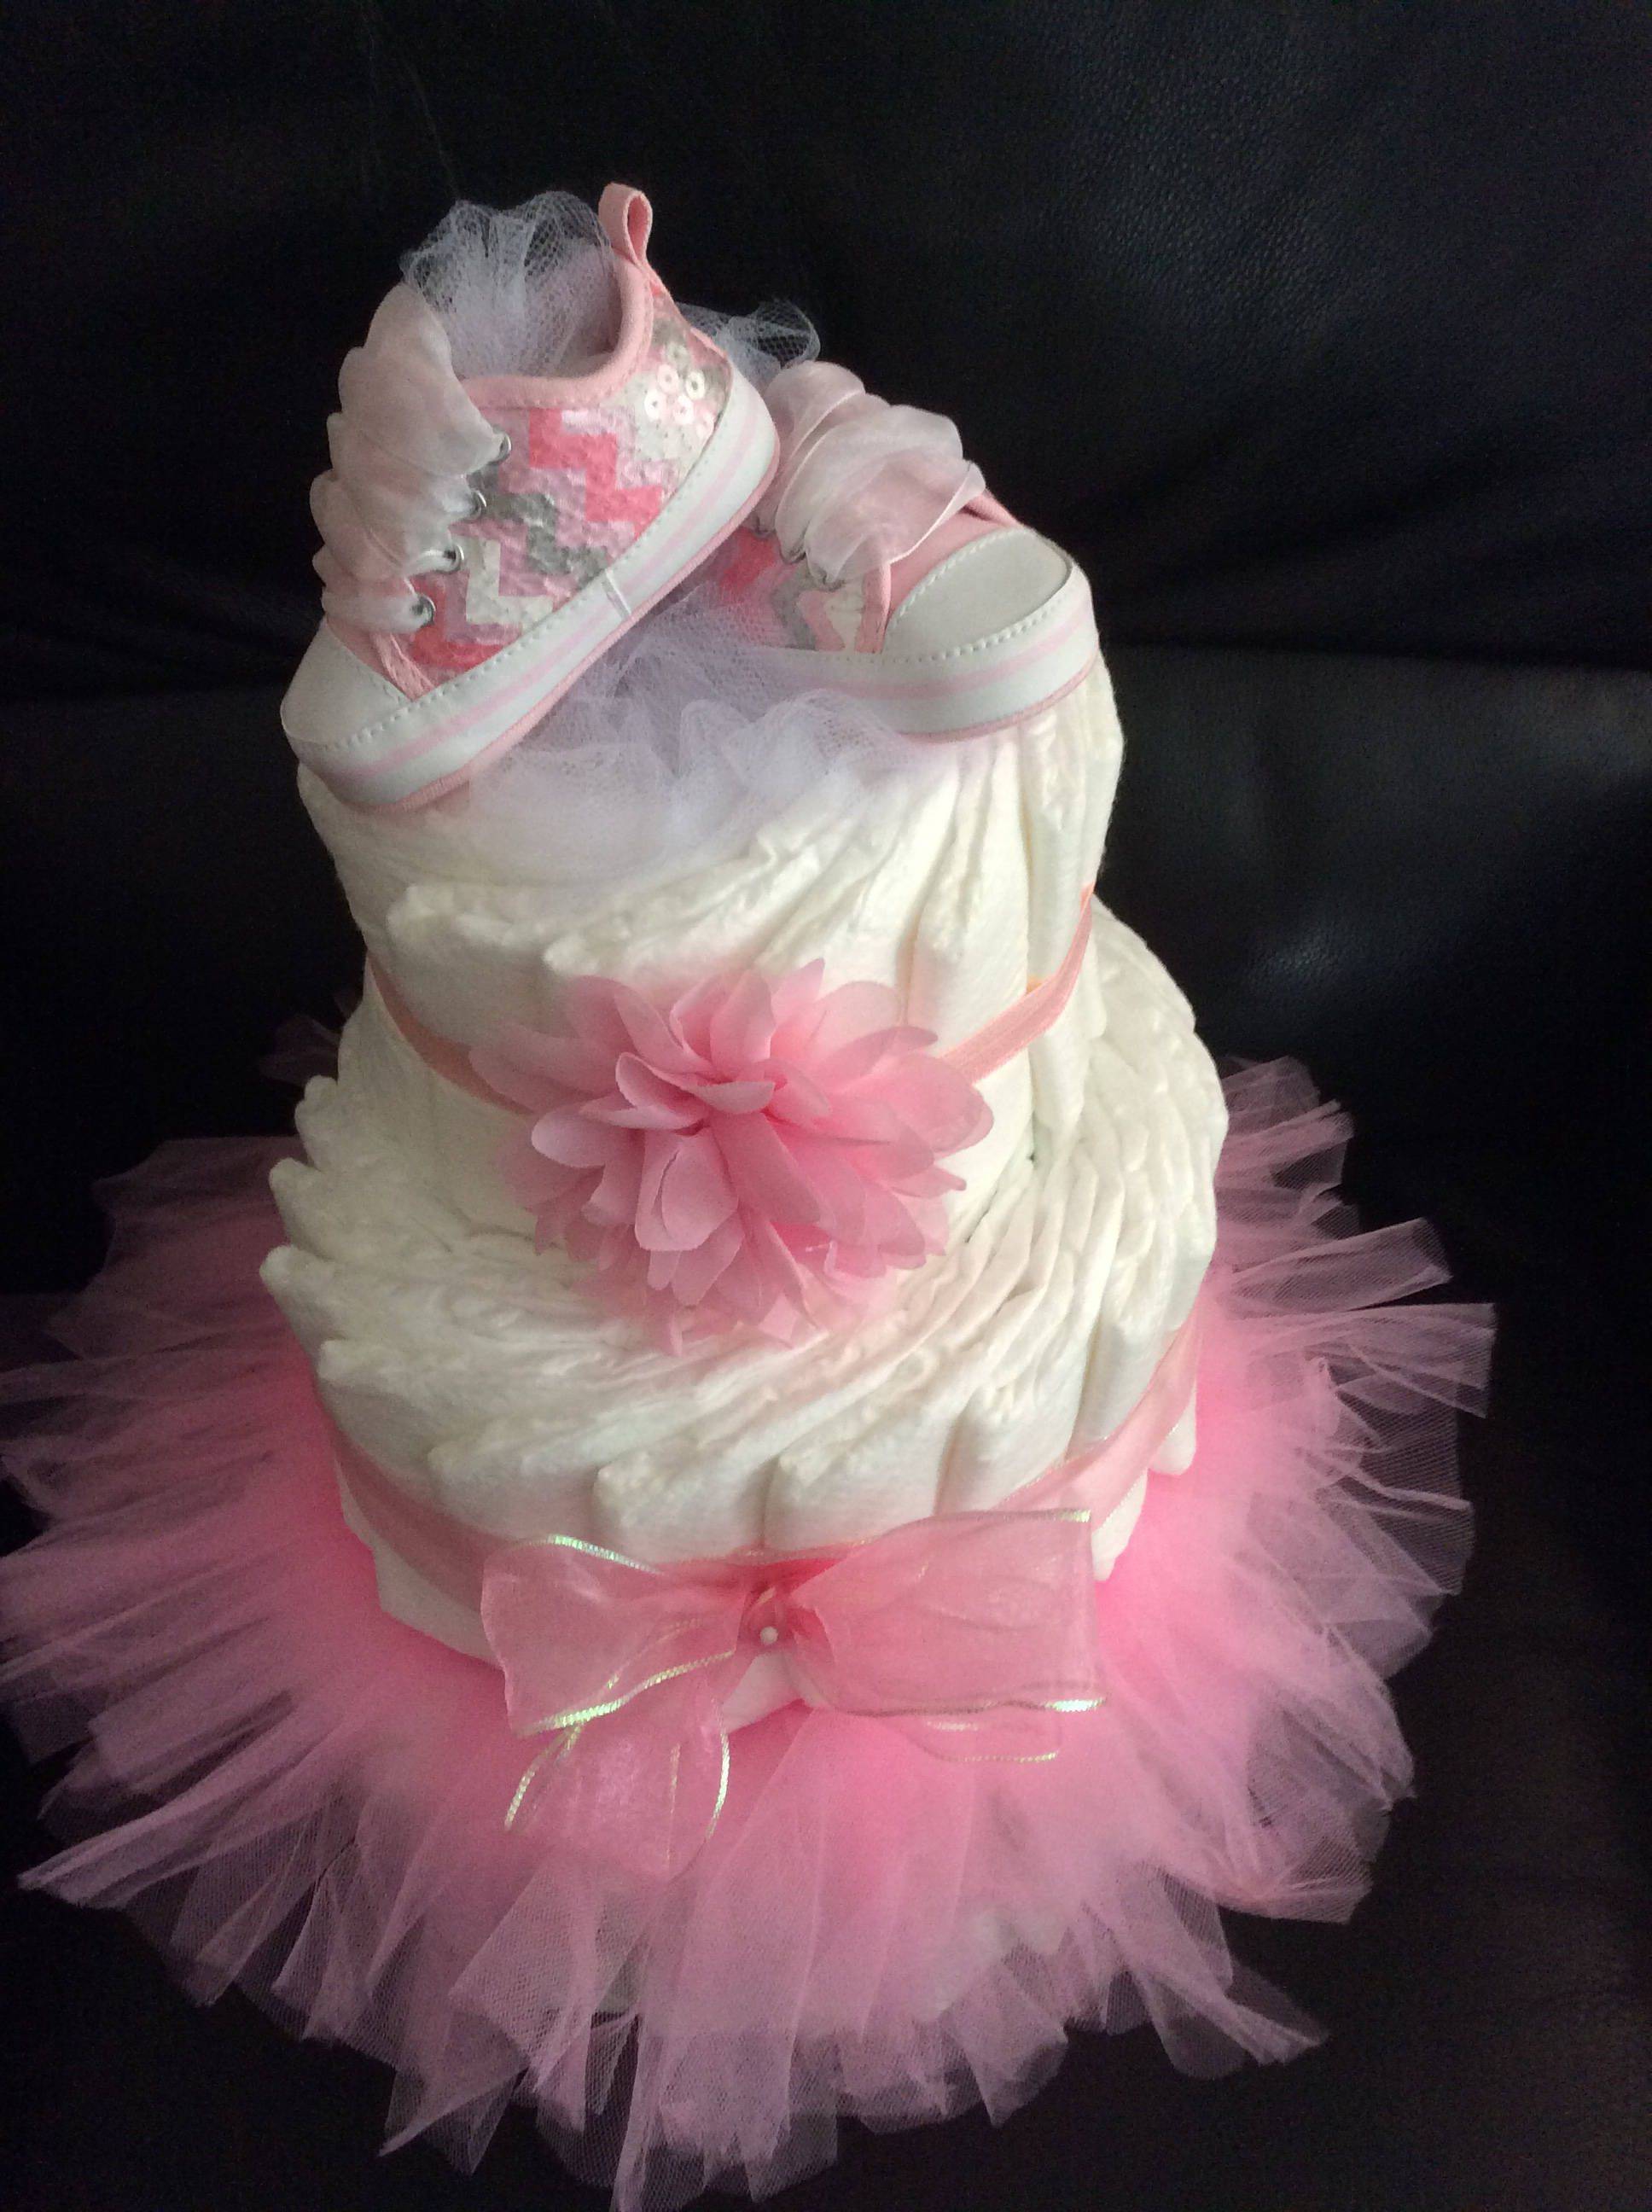 A Diaper Cake - Personalized Baby Gifts